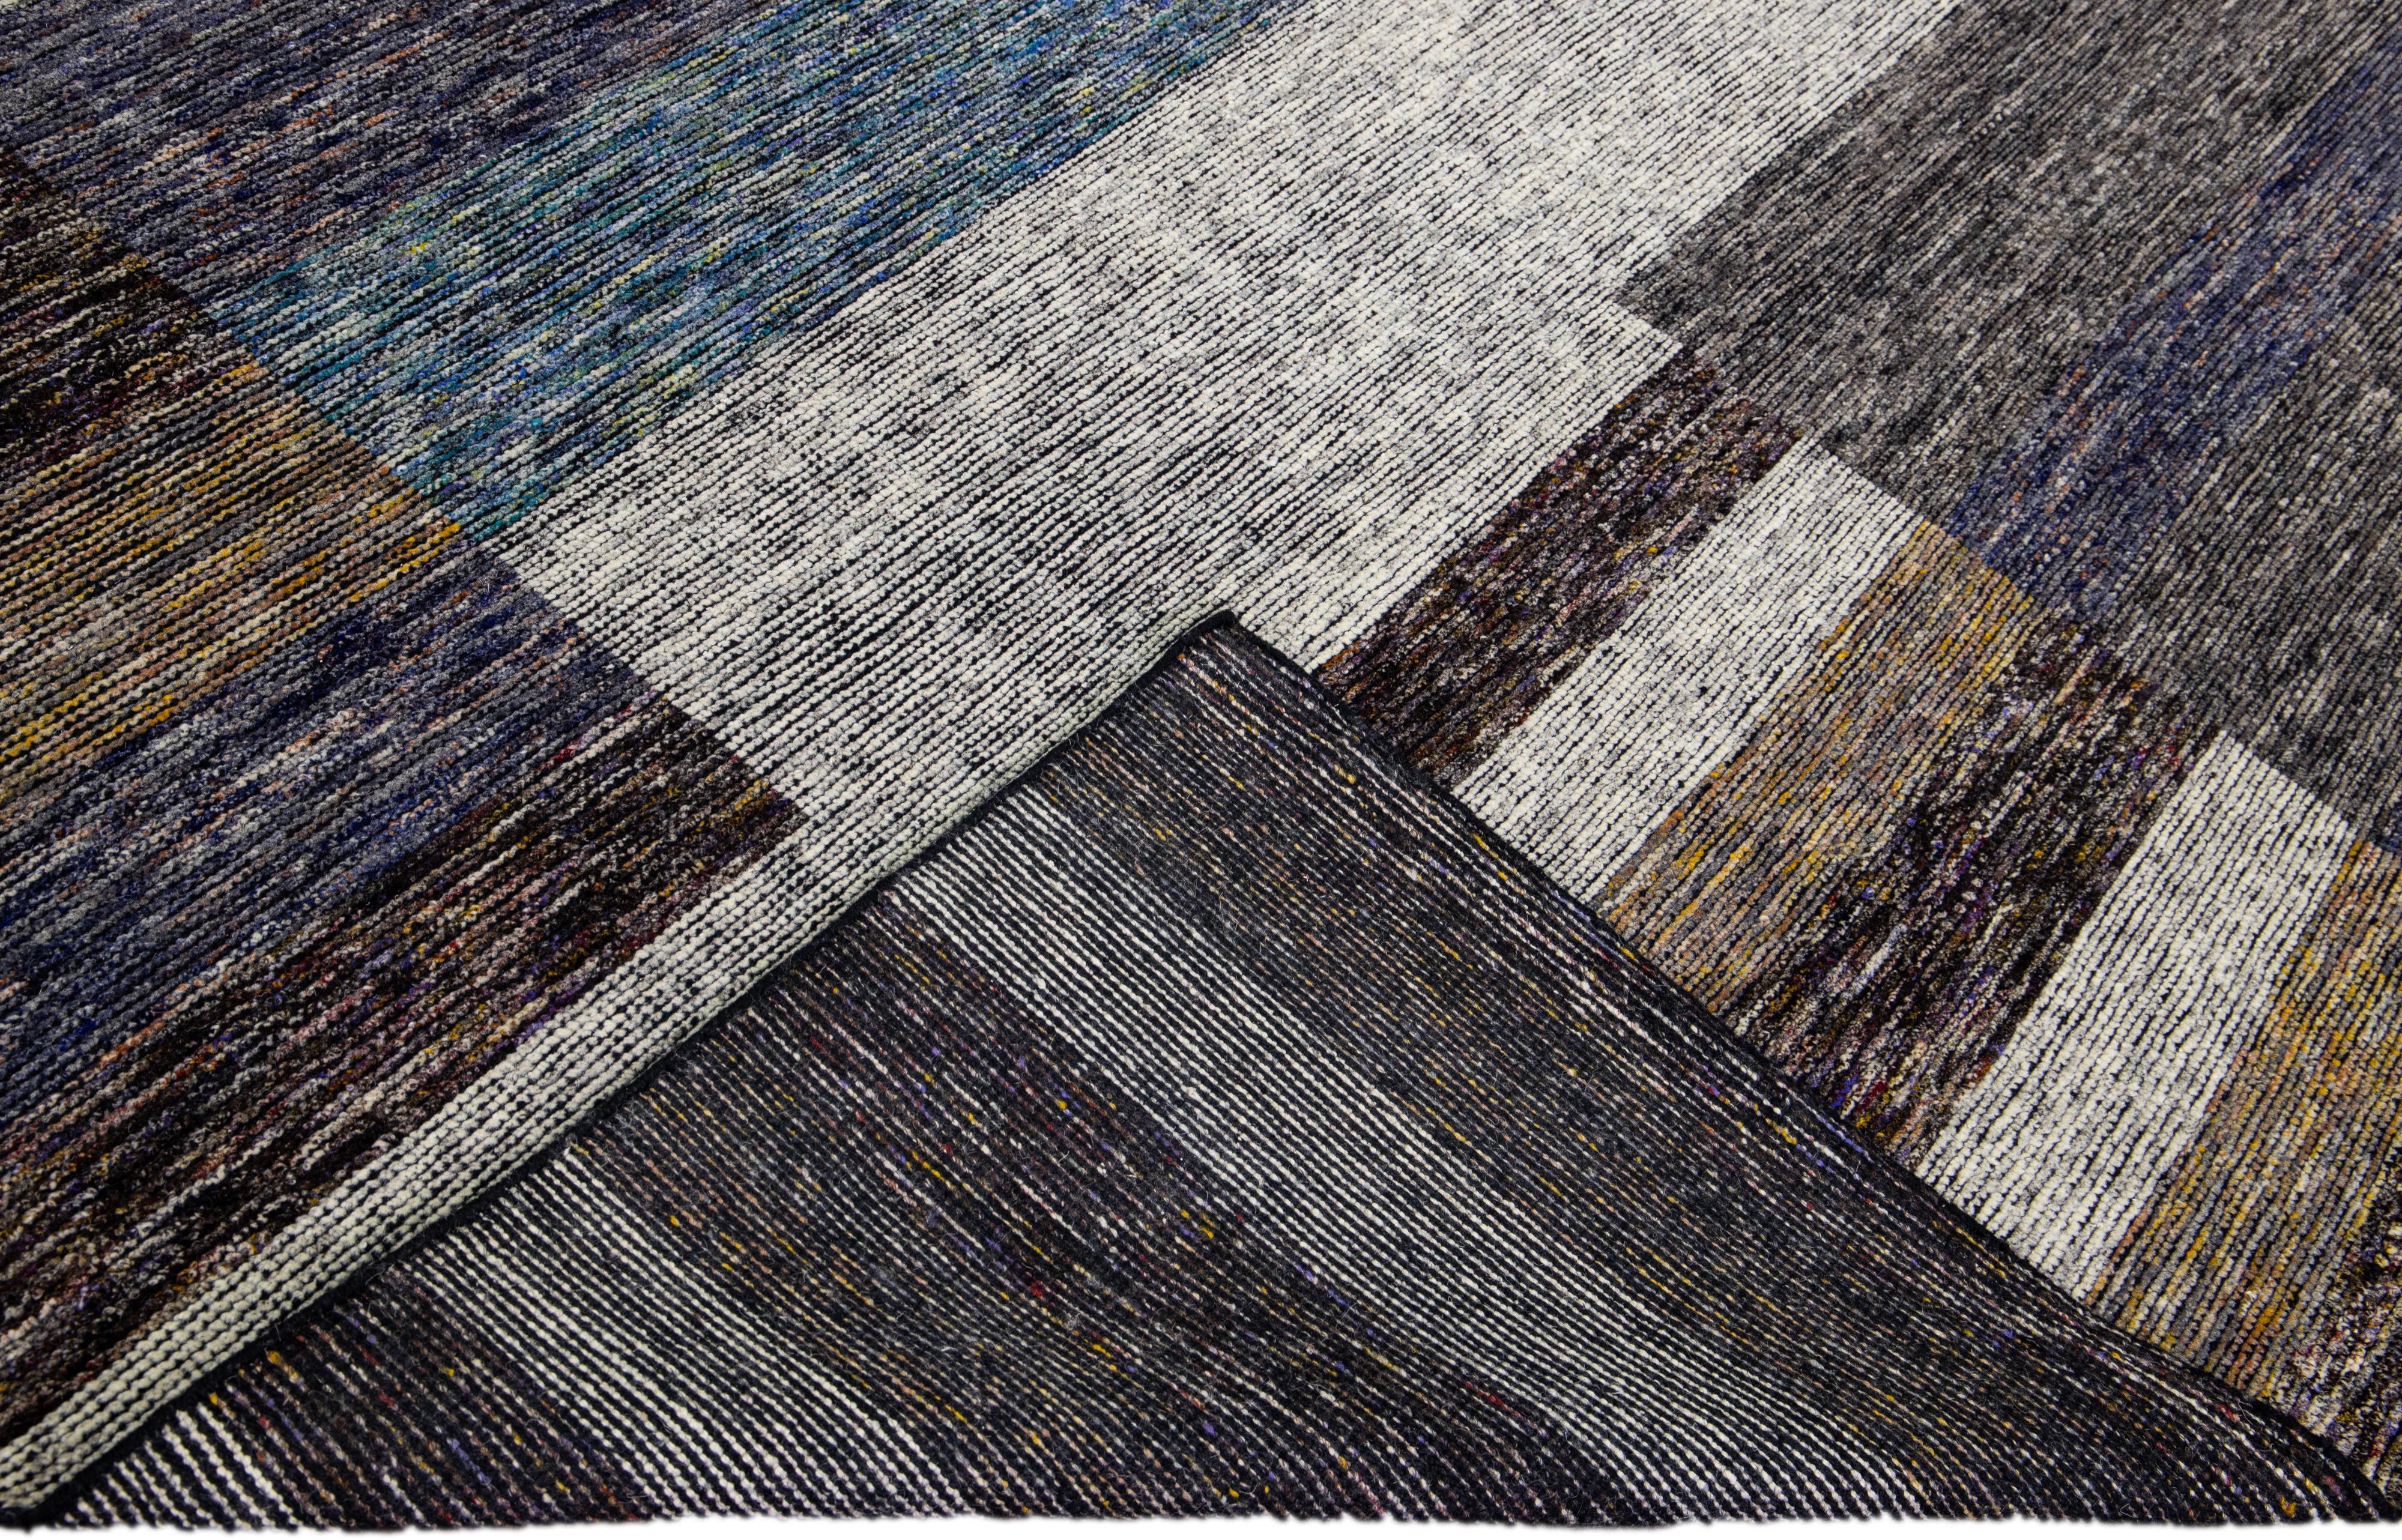 Beautiful modern Apadana's Safi Collection hand-knotted wool rug with an earthy colors field. This Modern rug has blue, gray, and brown accents a gorgeous layout Abstract design.

This rug measures: 10' x 14'2''.

Our rugs are professional